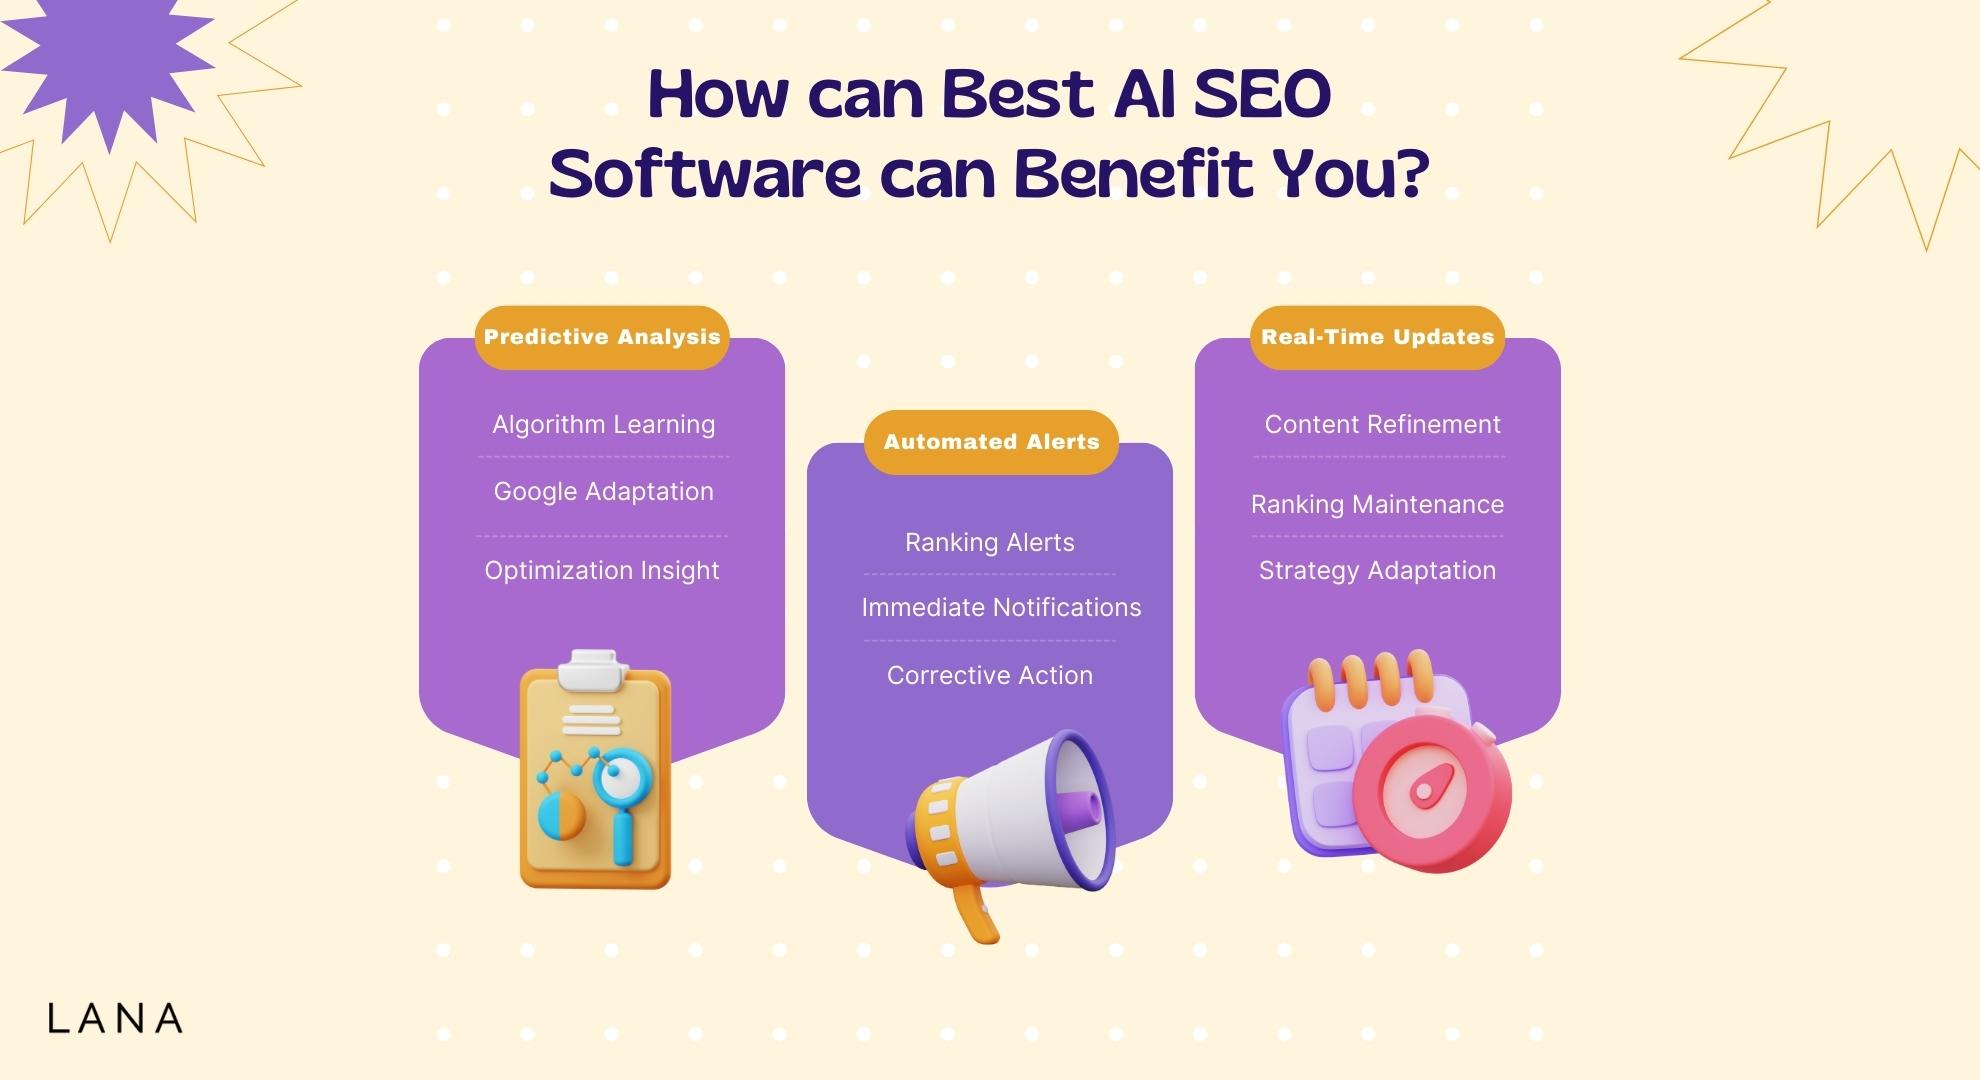 How can Best AI SEO Software can Benefit You 